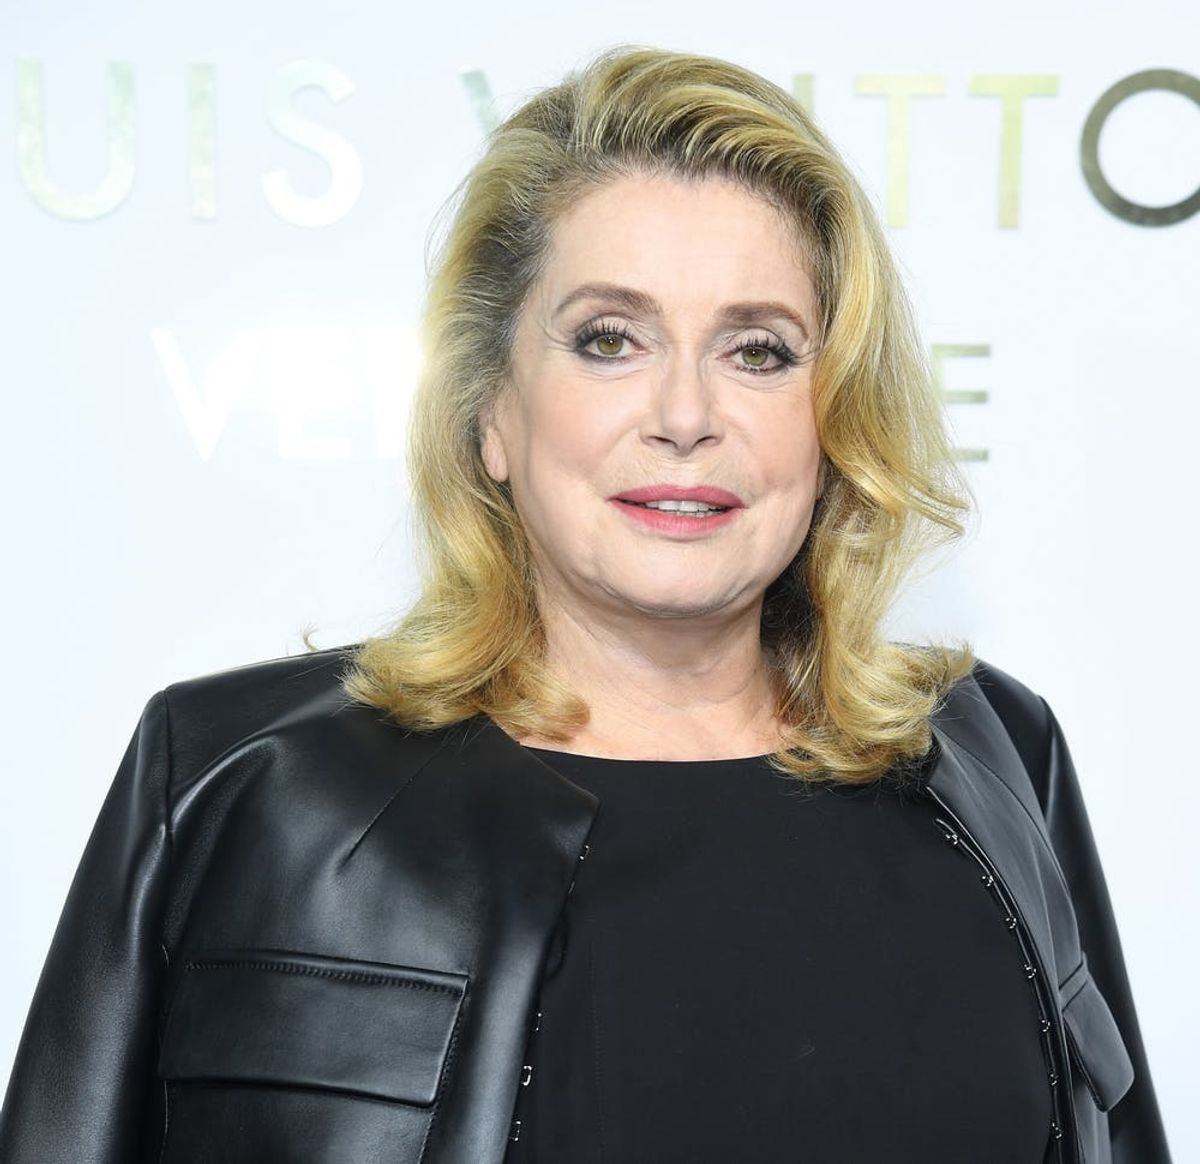 French Actress Catherine Deneuve Has Apologized for Her #MeToo Comments — Sort Of